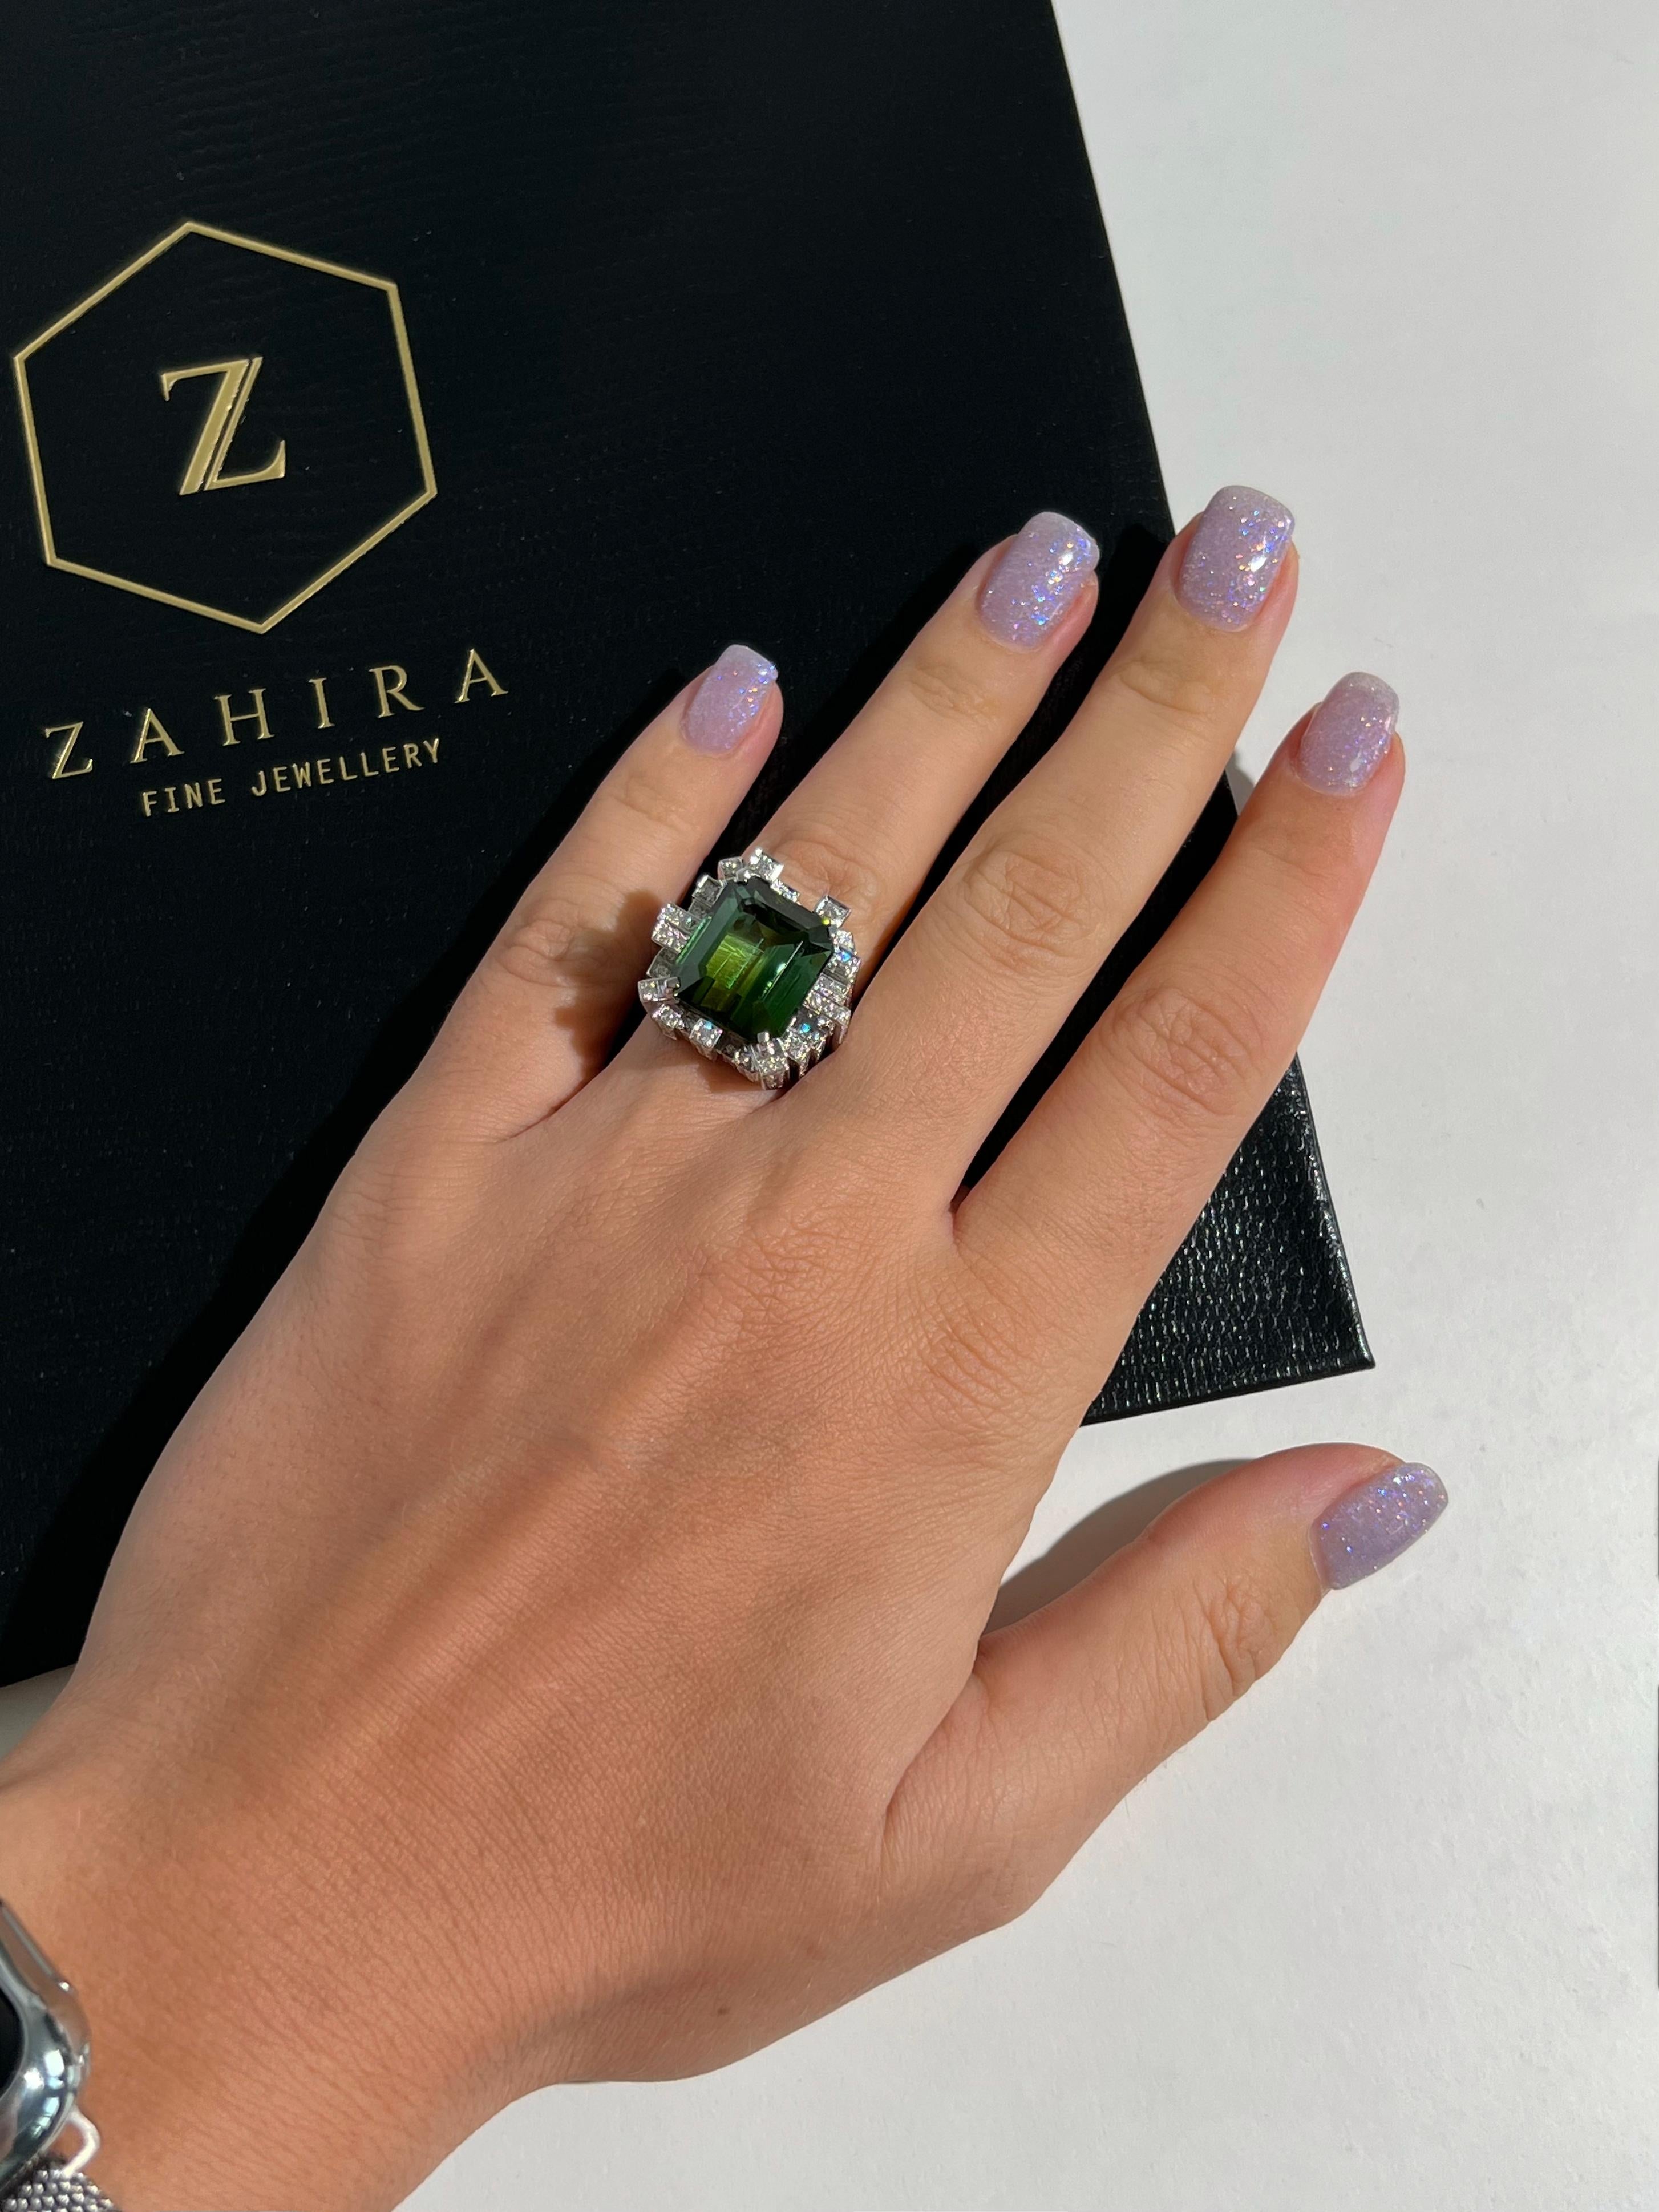 A 14.49 ct bi color green tourmaline is the center stone of this ring. Beautiful shades of green cascade down this emerald cut stone. Natural and eye clean, this bi color tourmaline is accented with 2.07 cts of natural G VS diamond towers set in 18k